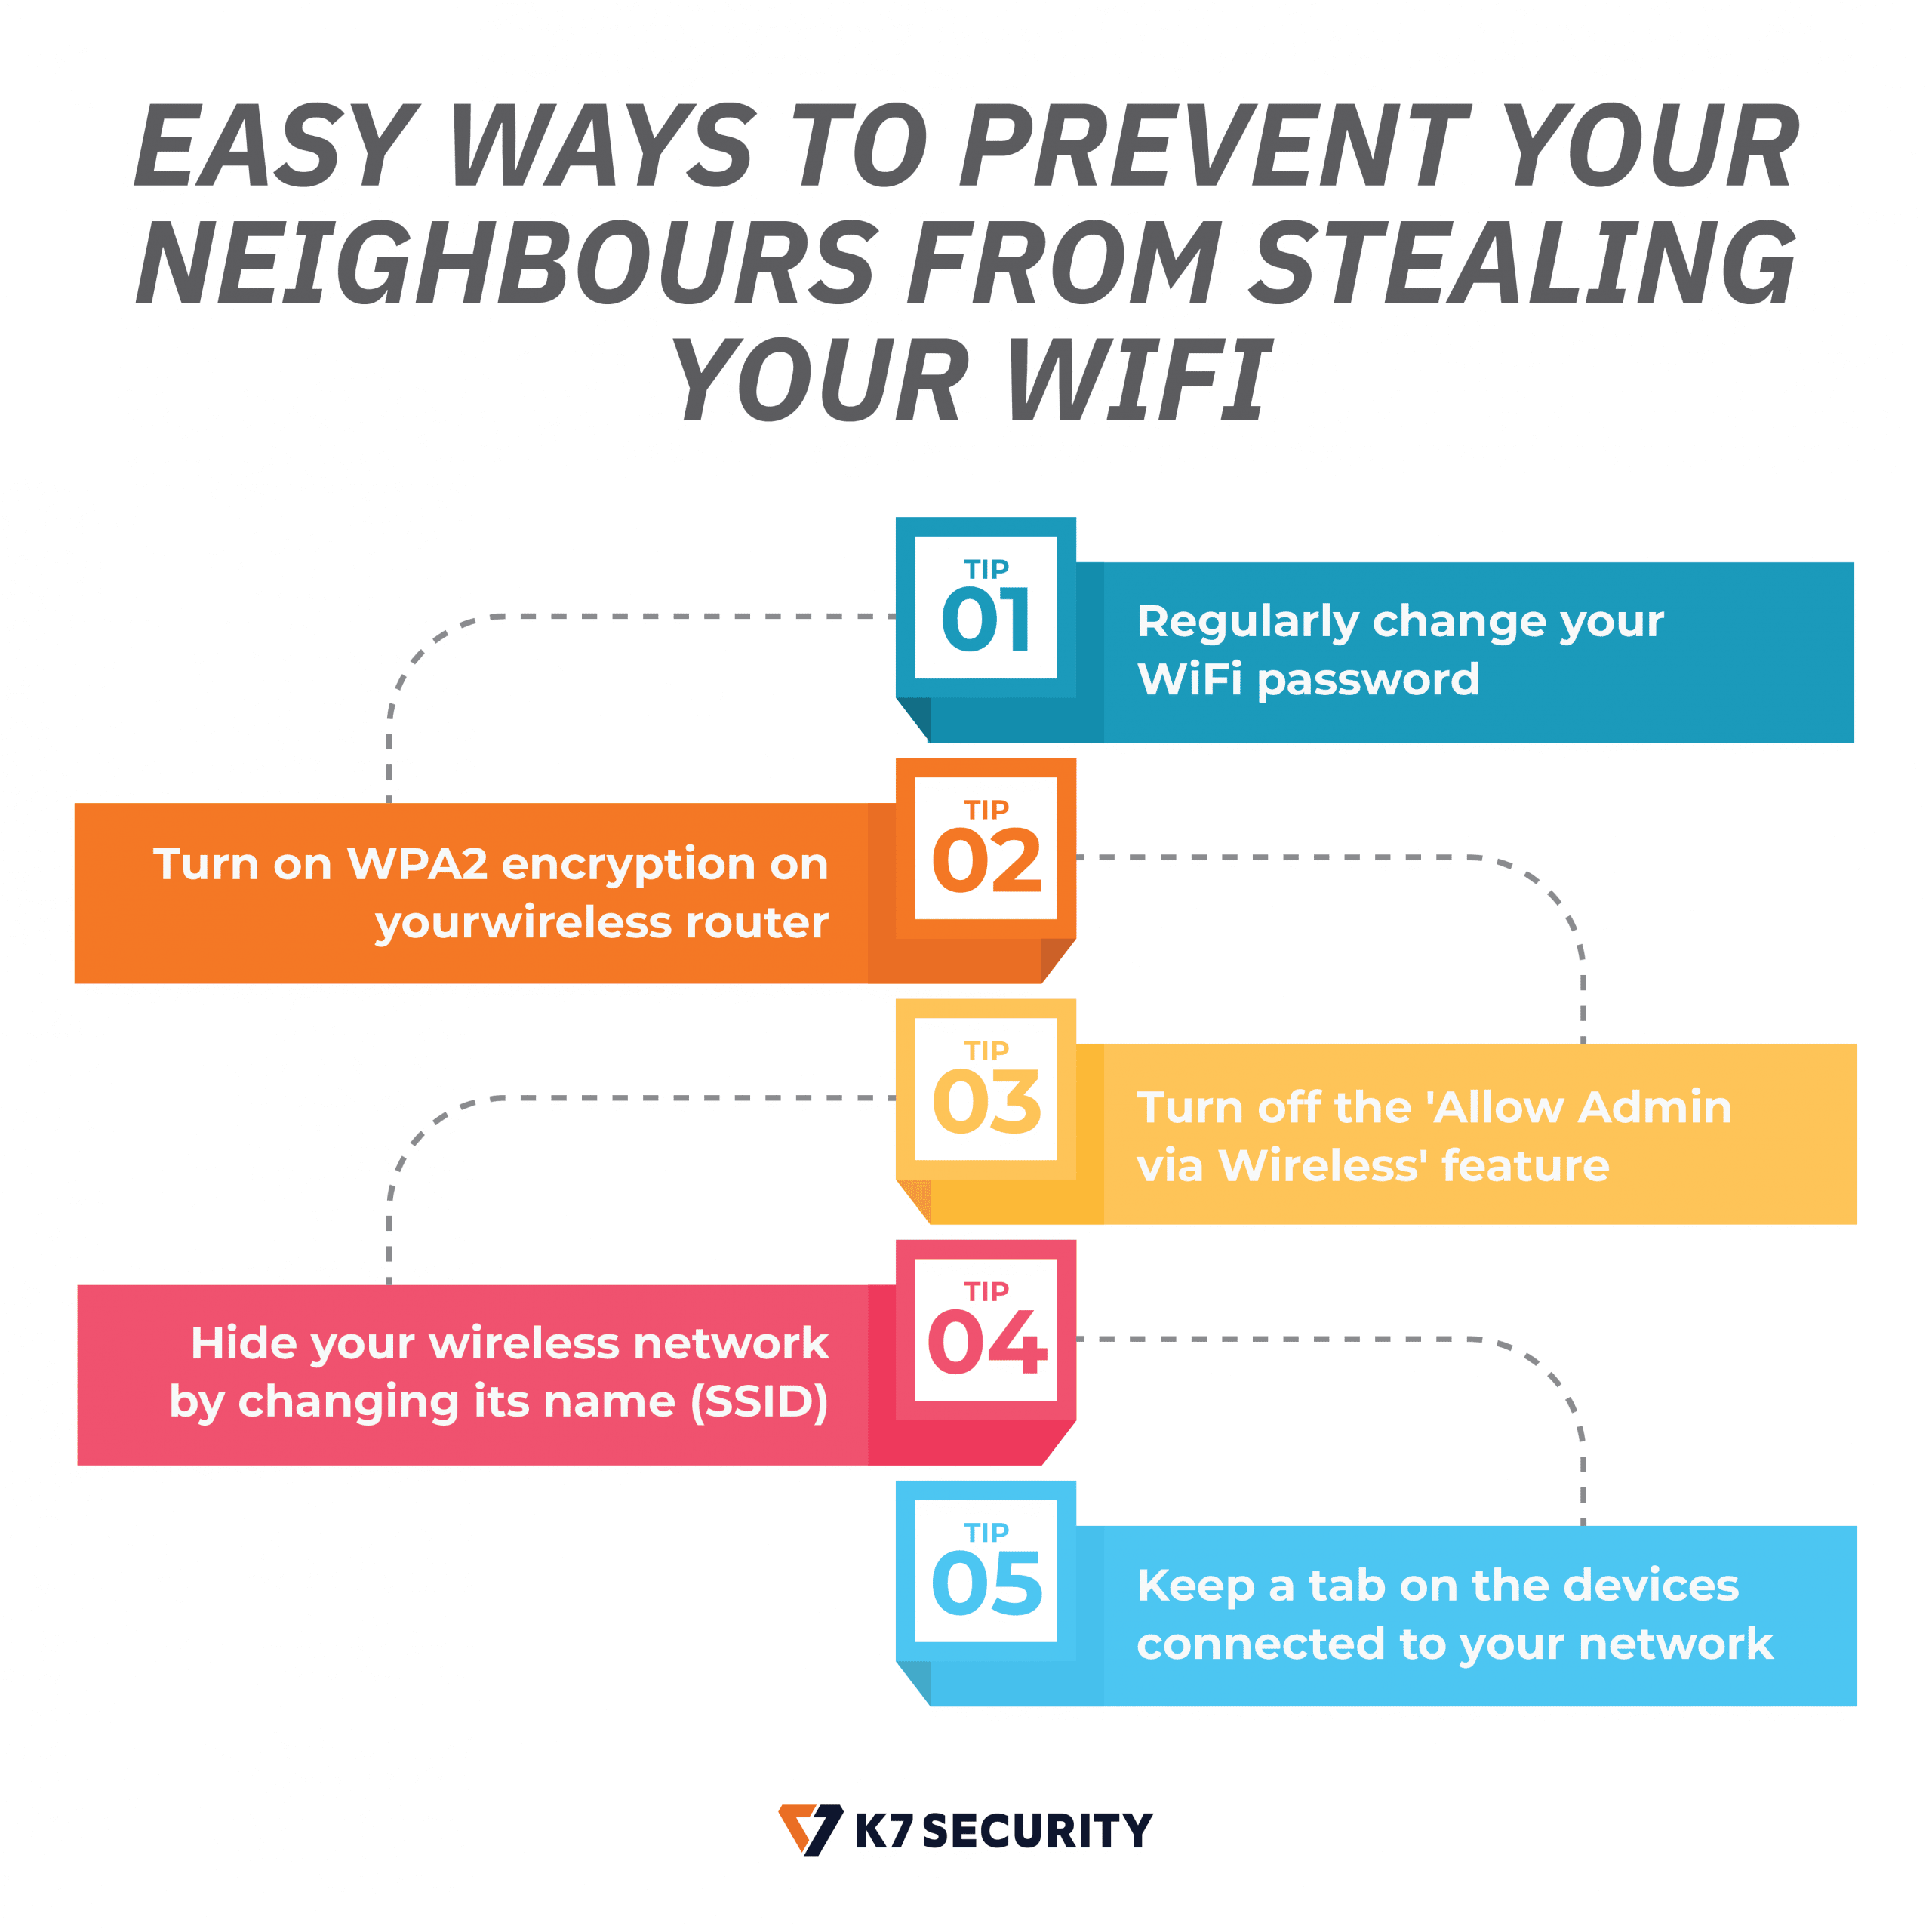 Prevent your neighbours from stealing your WiFi